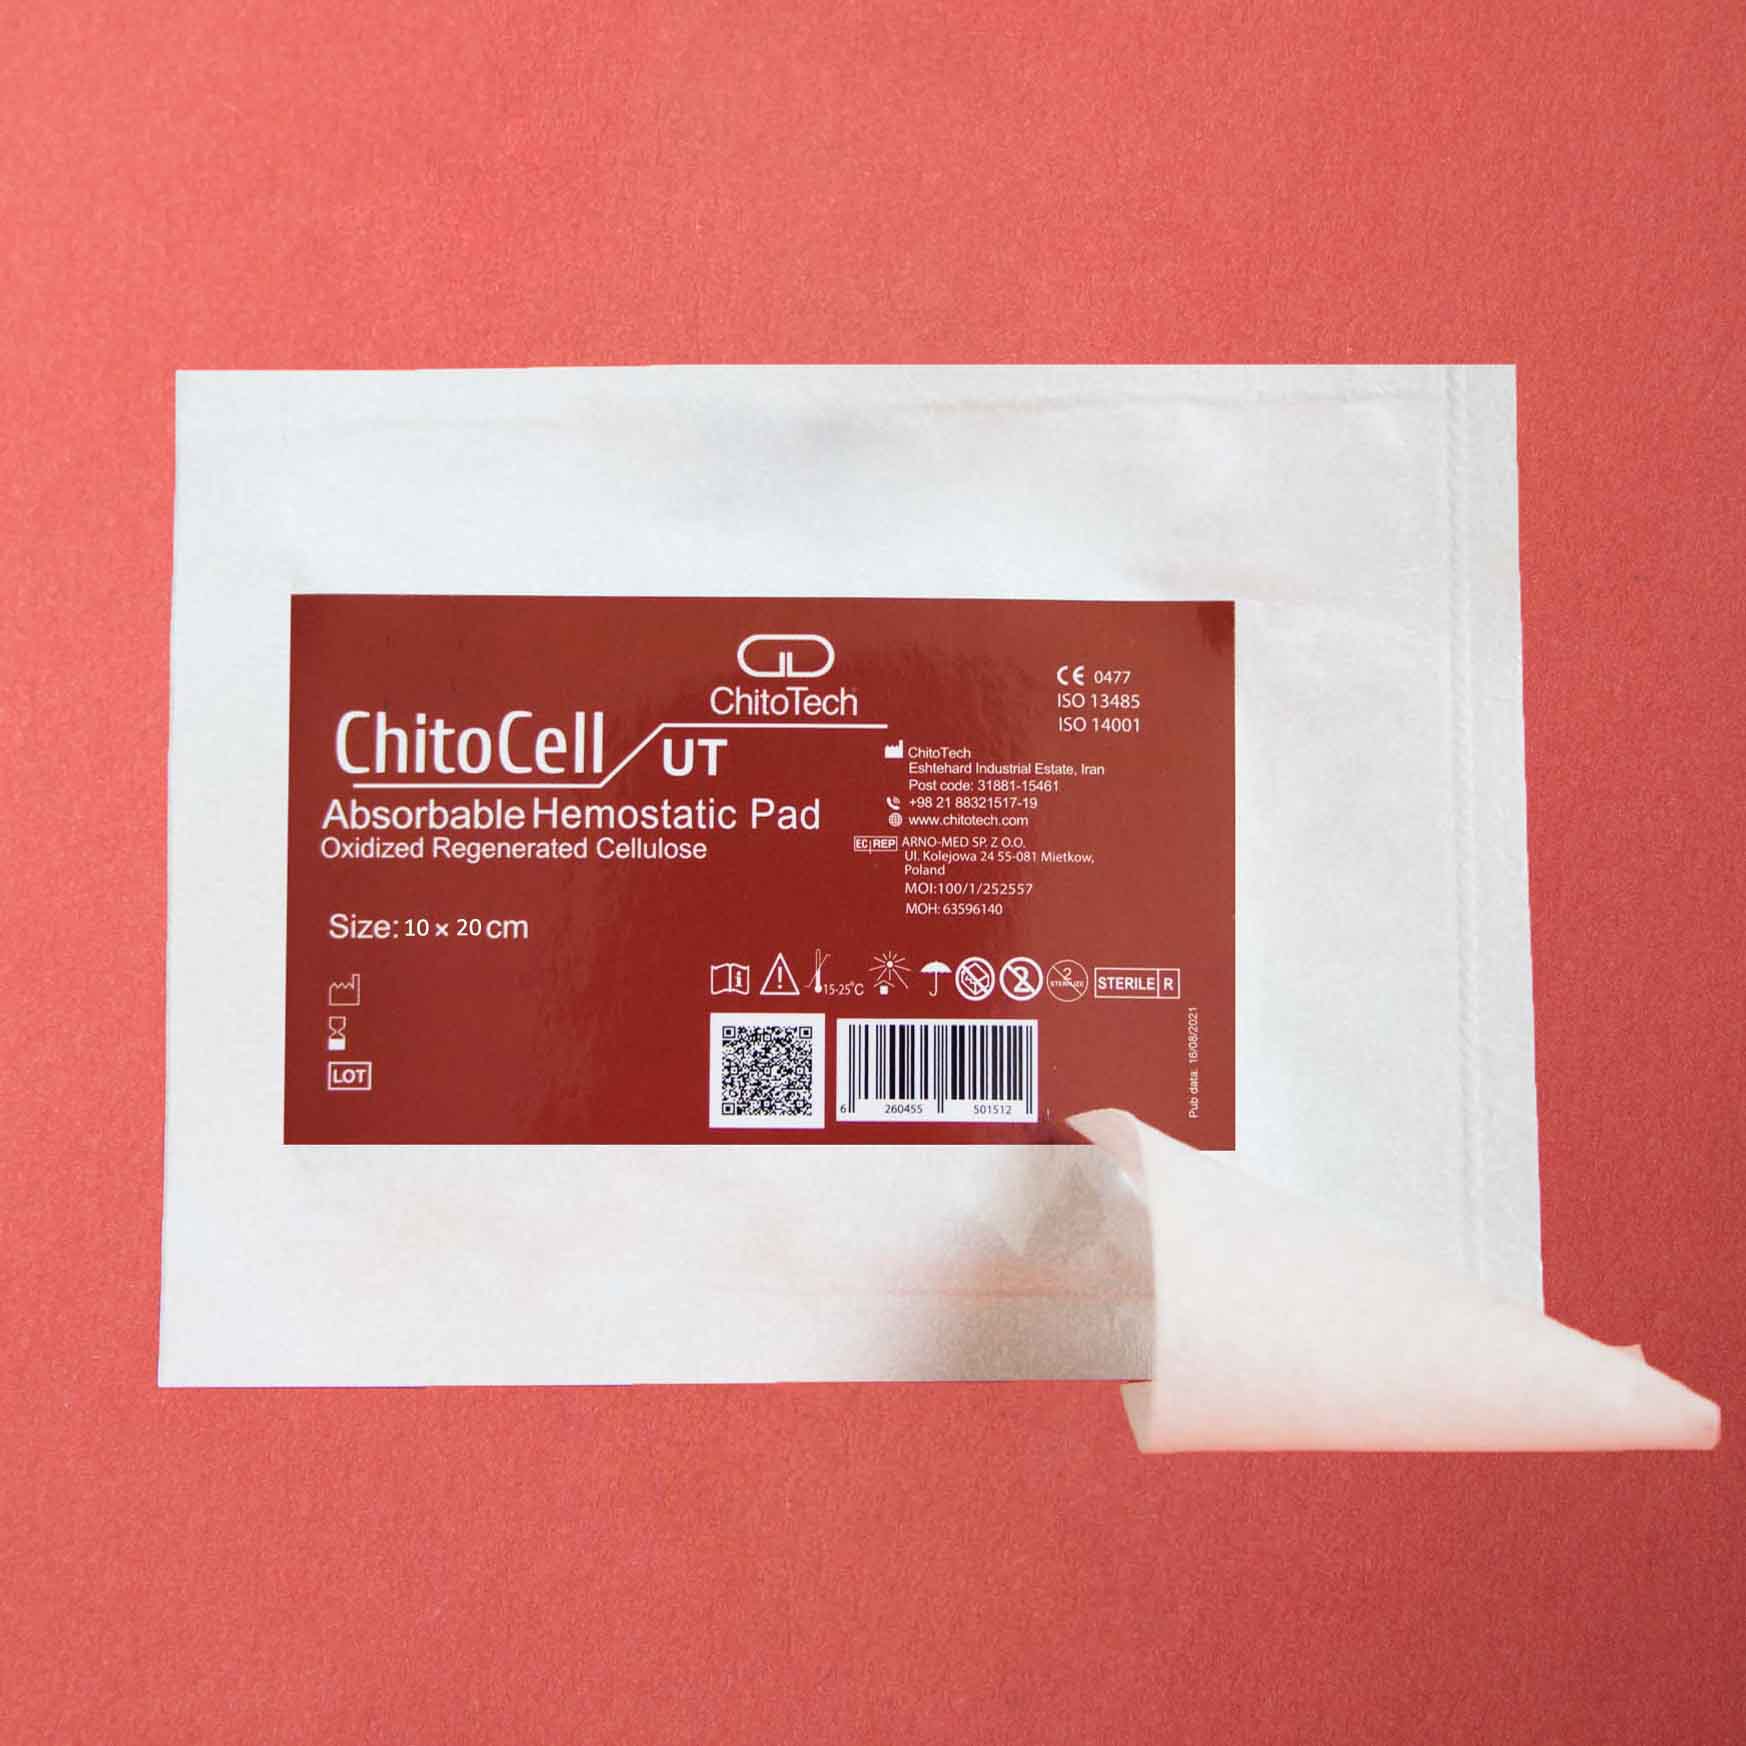 ChitoCell Ultra-Thin